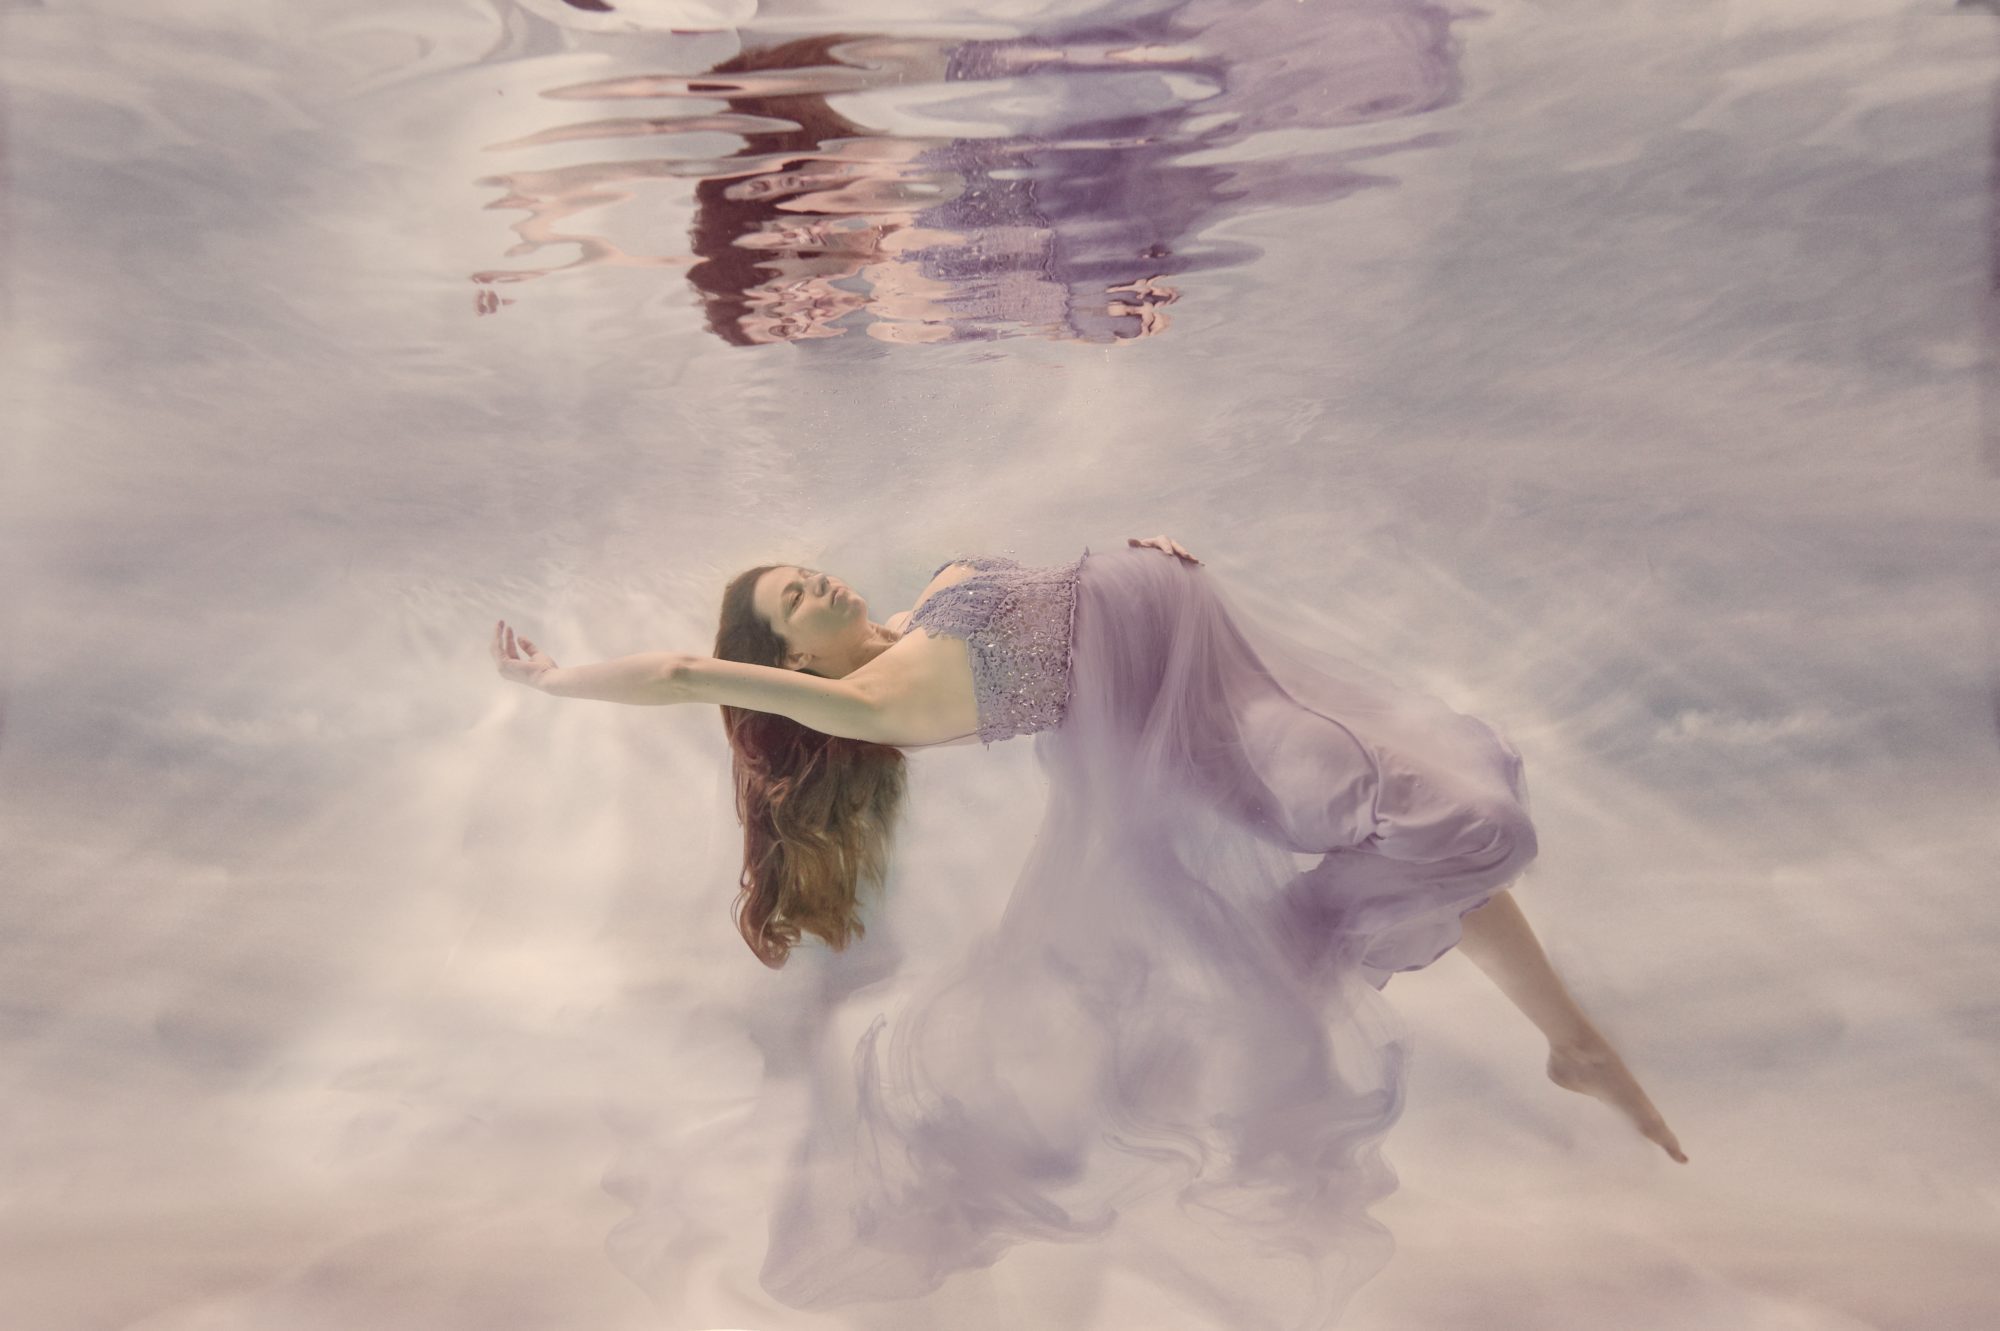 Underwater maternity shoot of a pregnant lady in a lilac dress